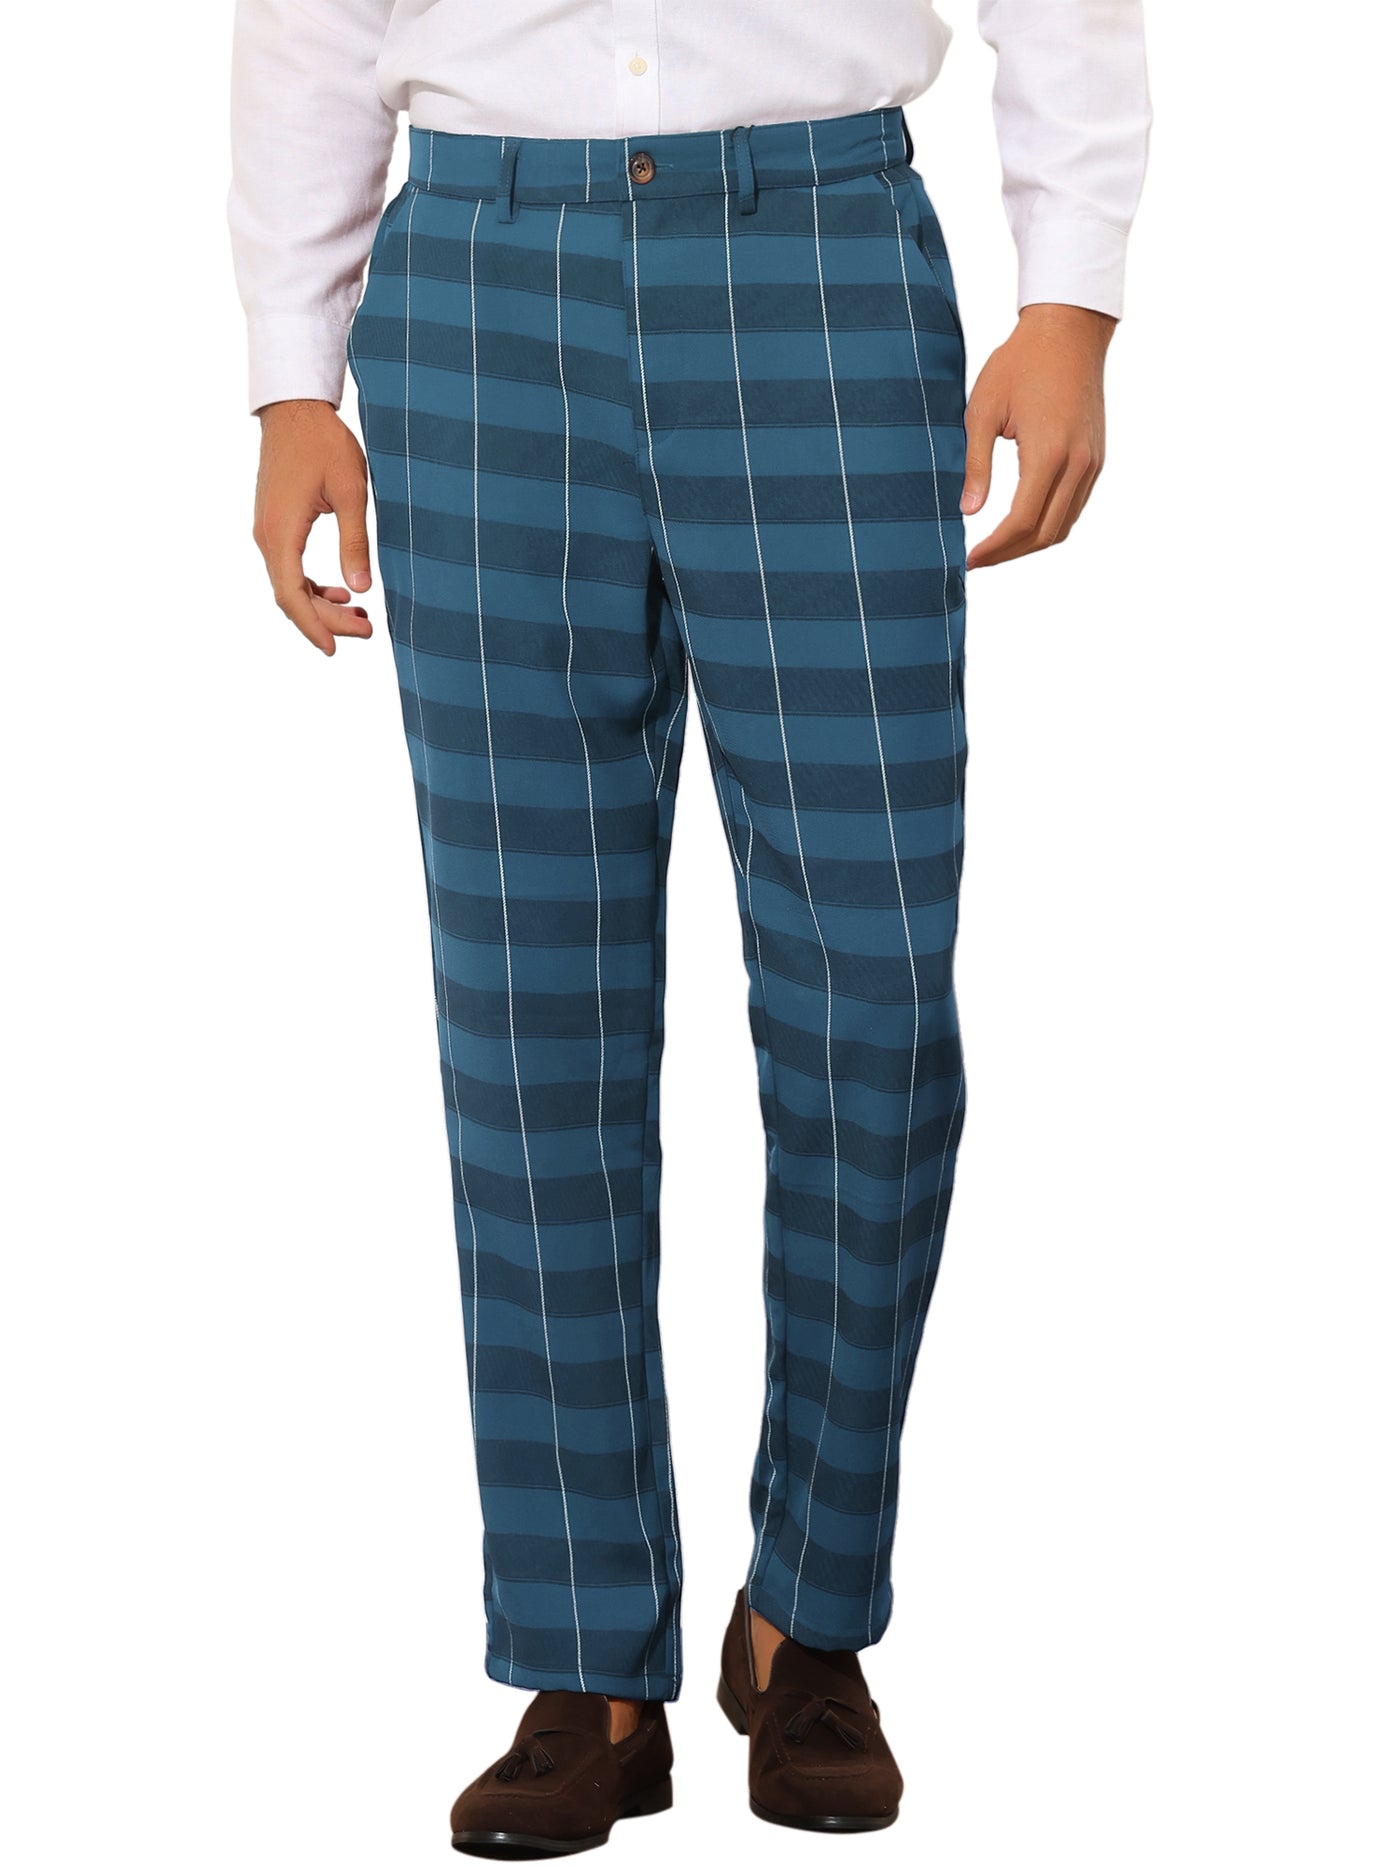 Bublédon Men's Plaid Casual Slim Fit Lightweight Tapered Checked Pants